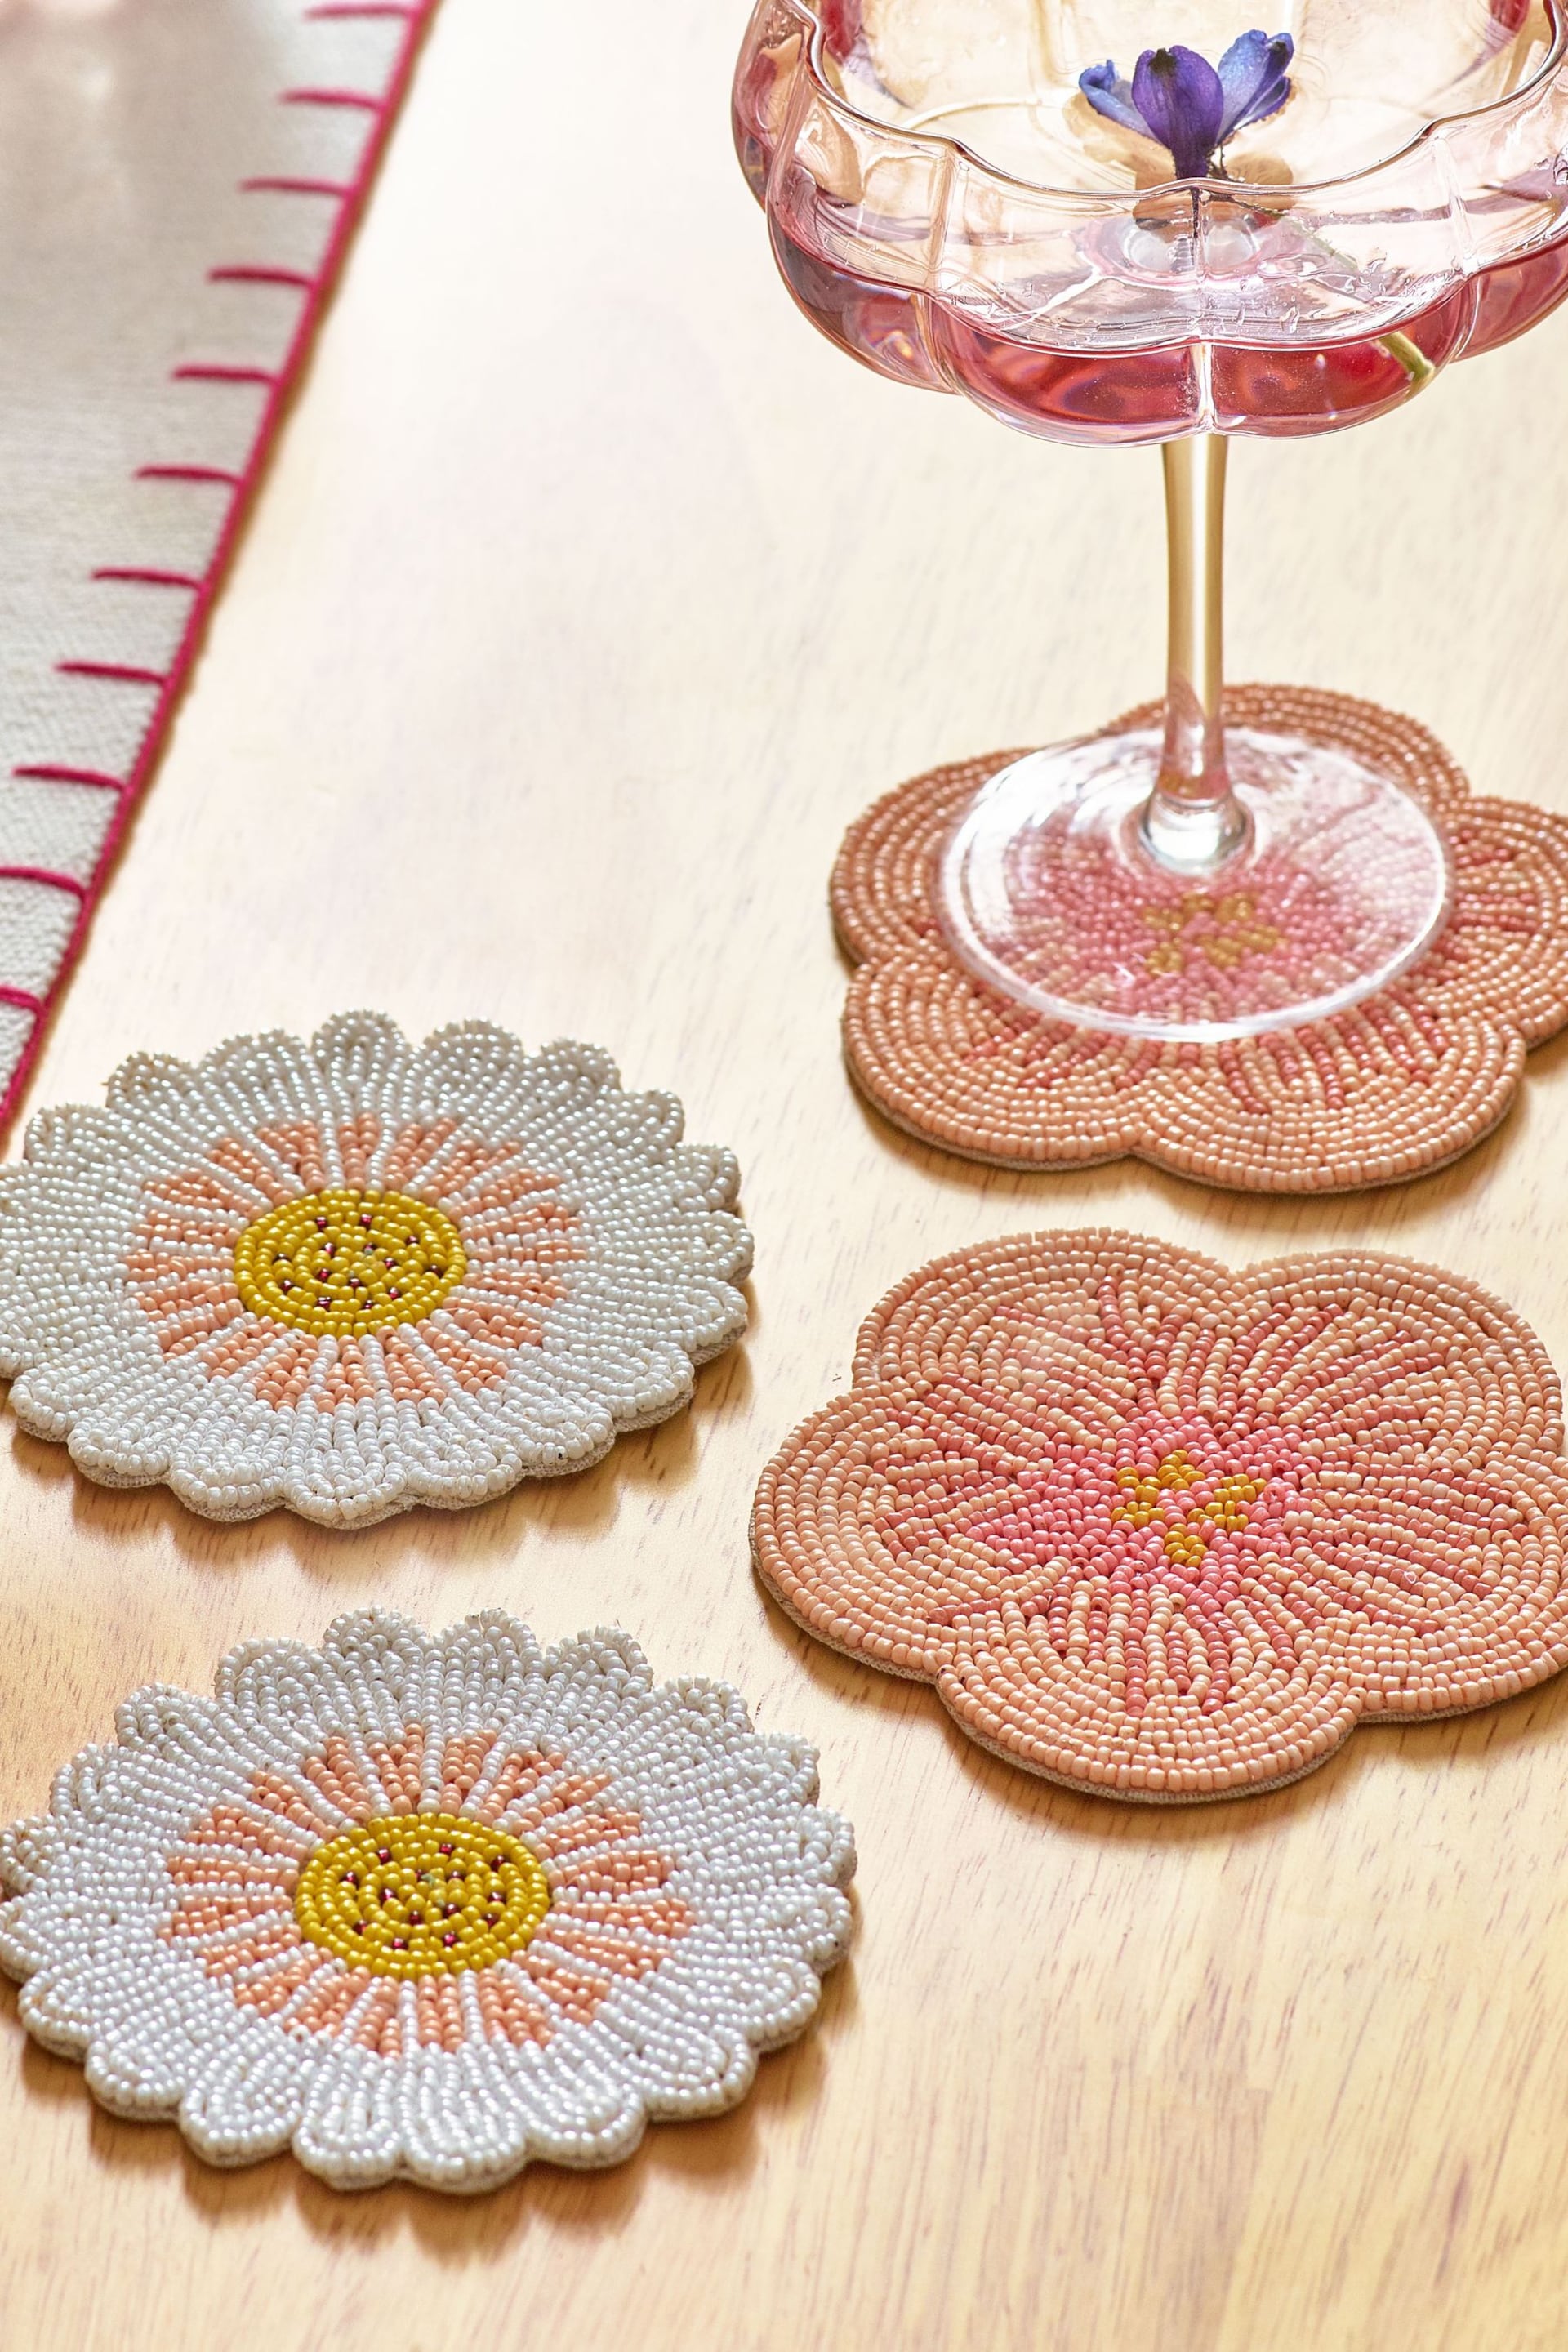 Set of 4 Pink Floral Beaded Coasters - Image 2 of 3